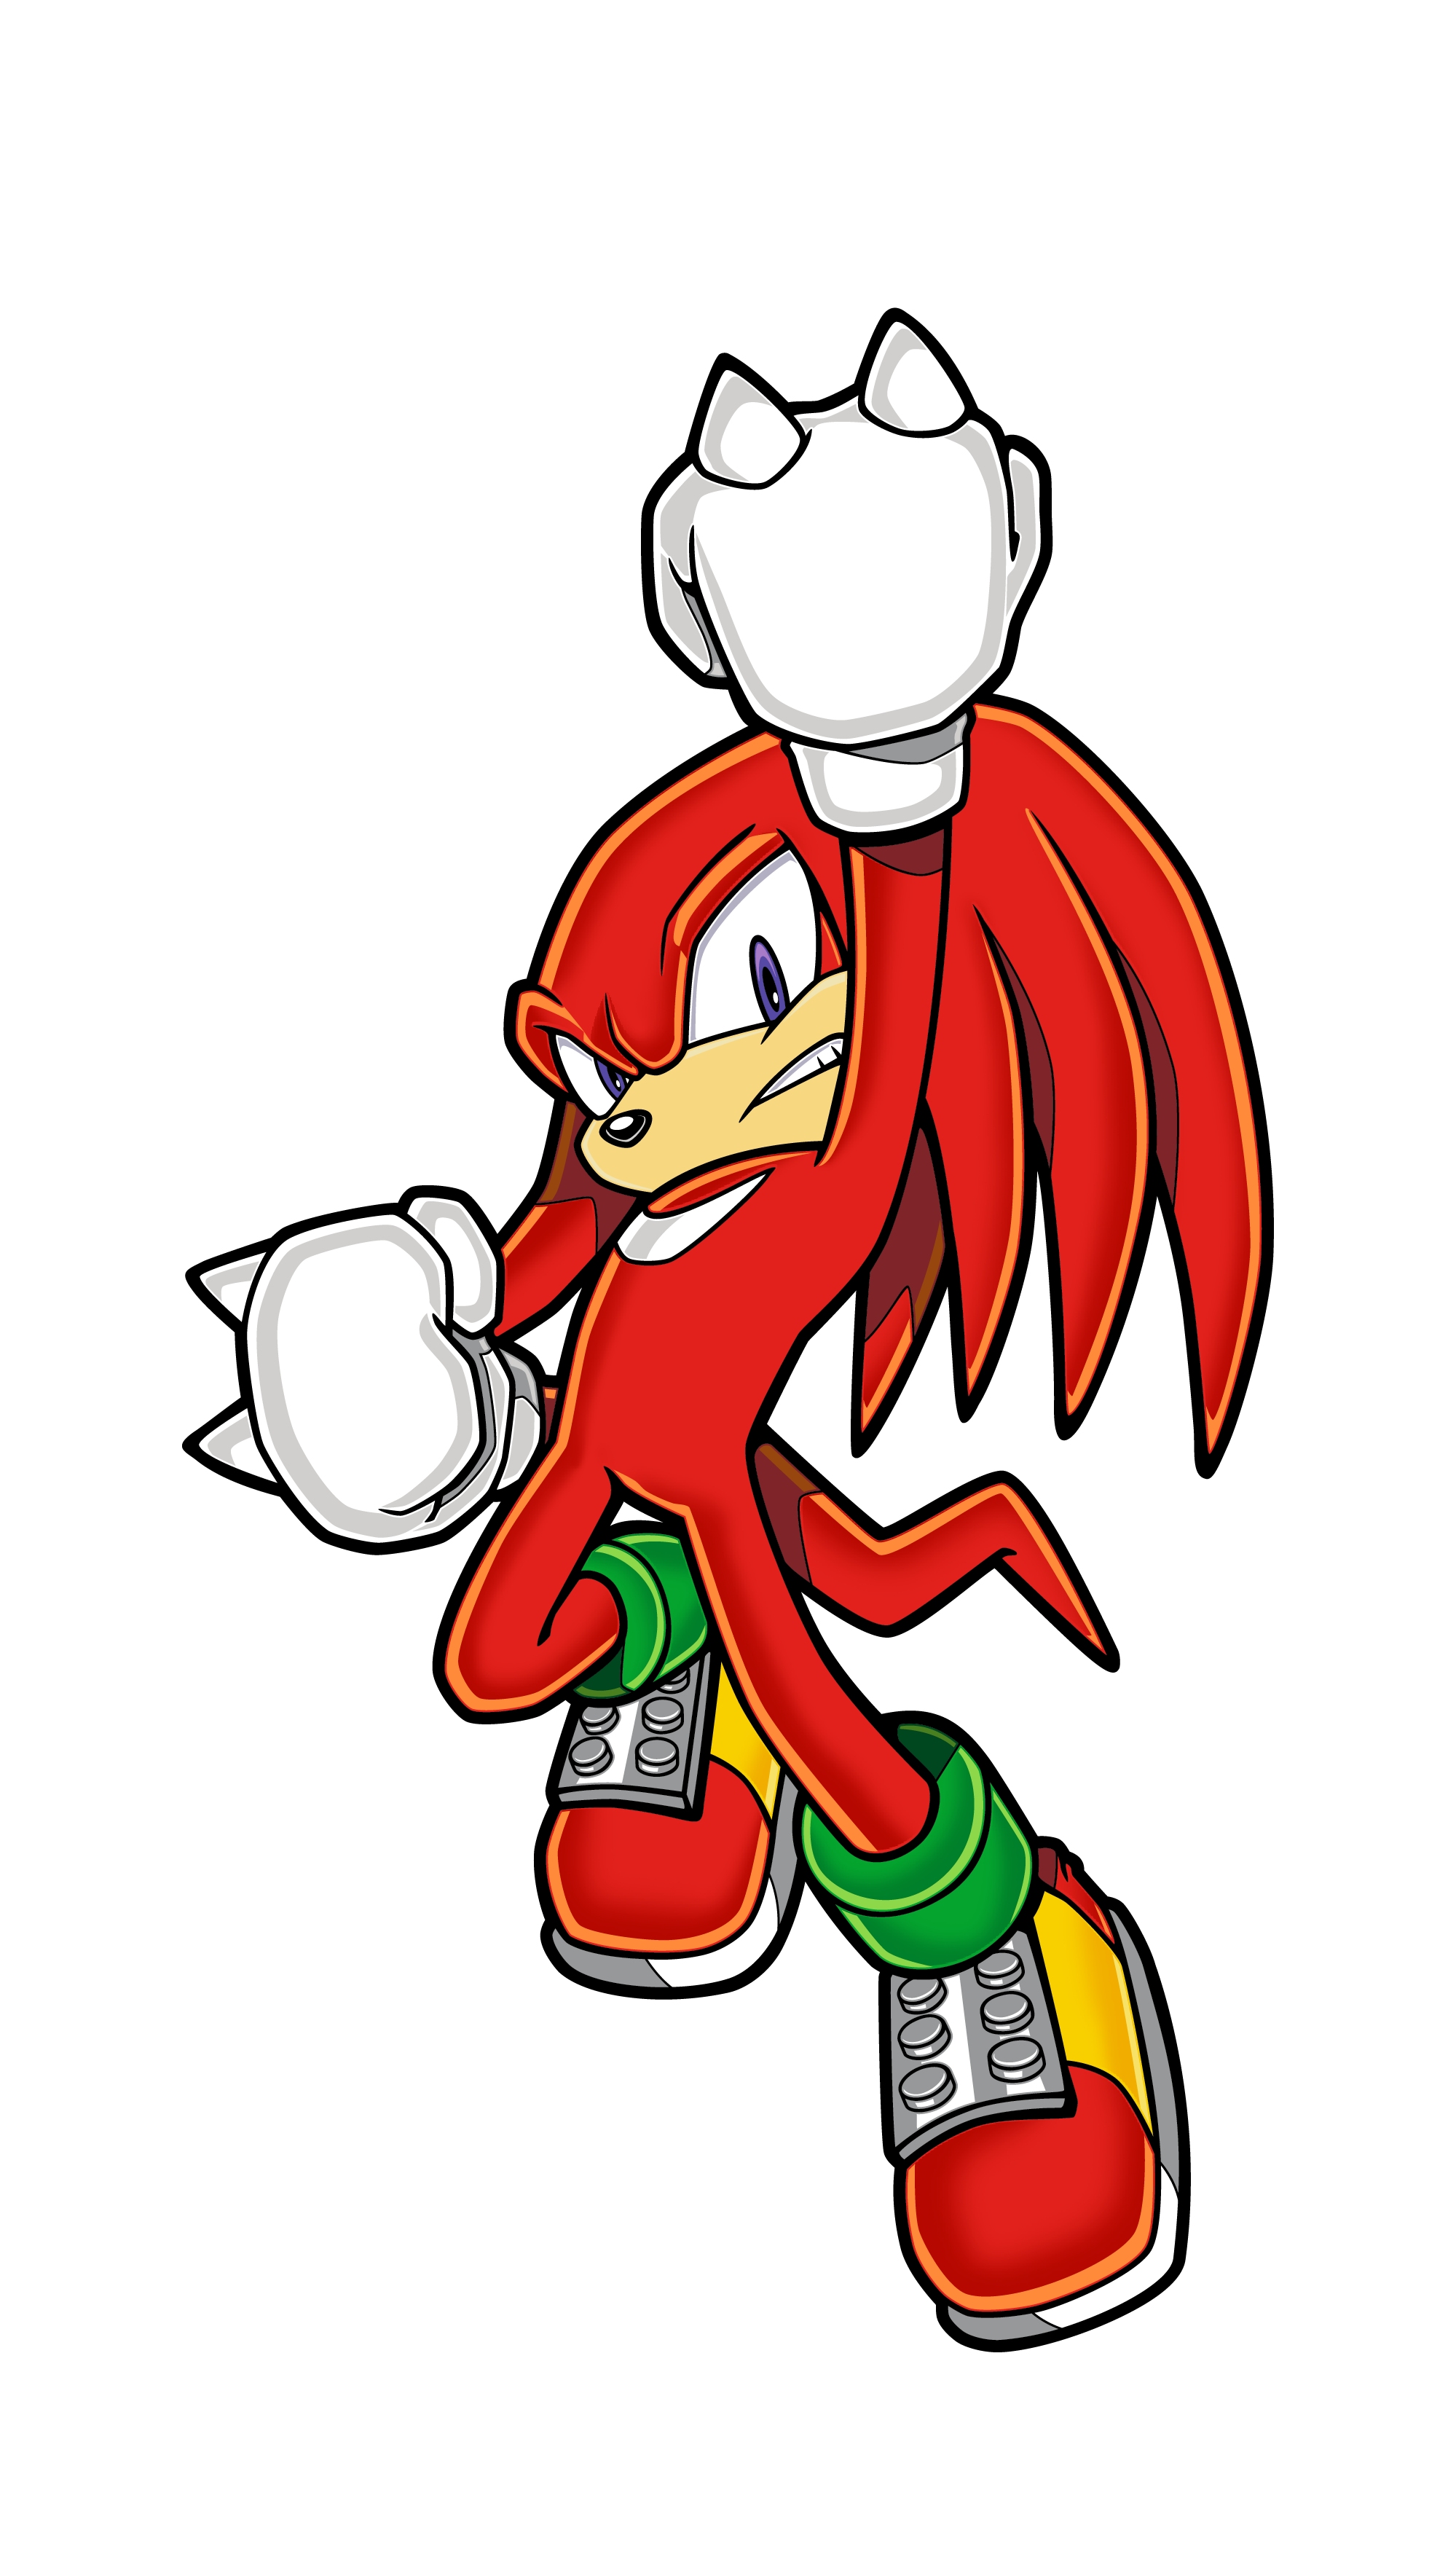 Knuckles (1354)